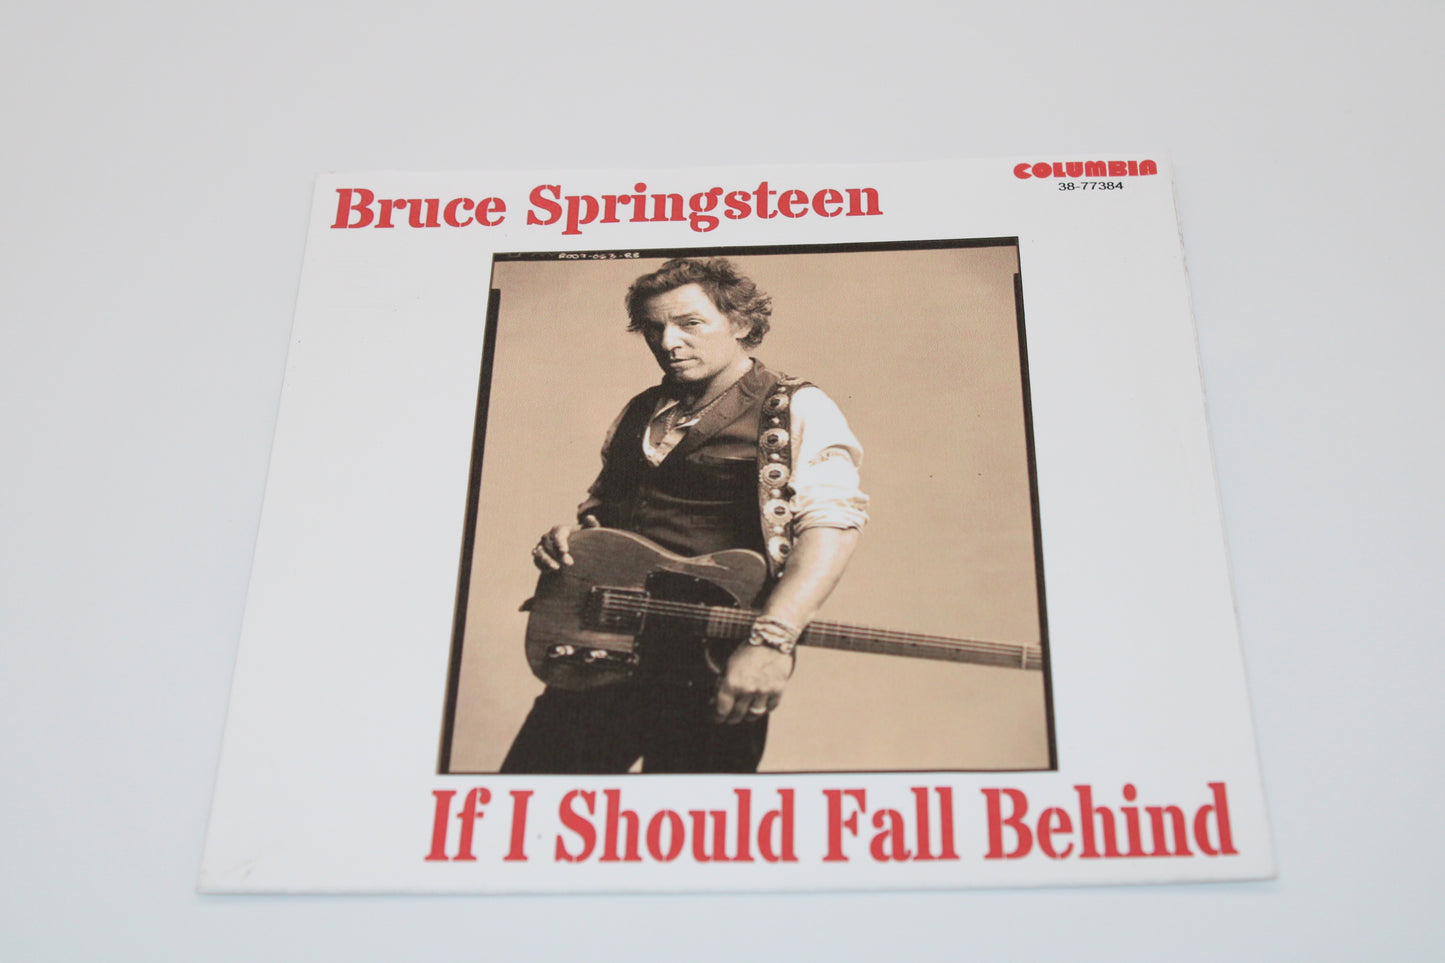 Bruce Springsteen Streets of Philadelphia with Rare Picture Sleeve - 45 record 1993